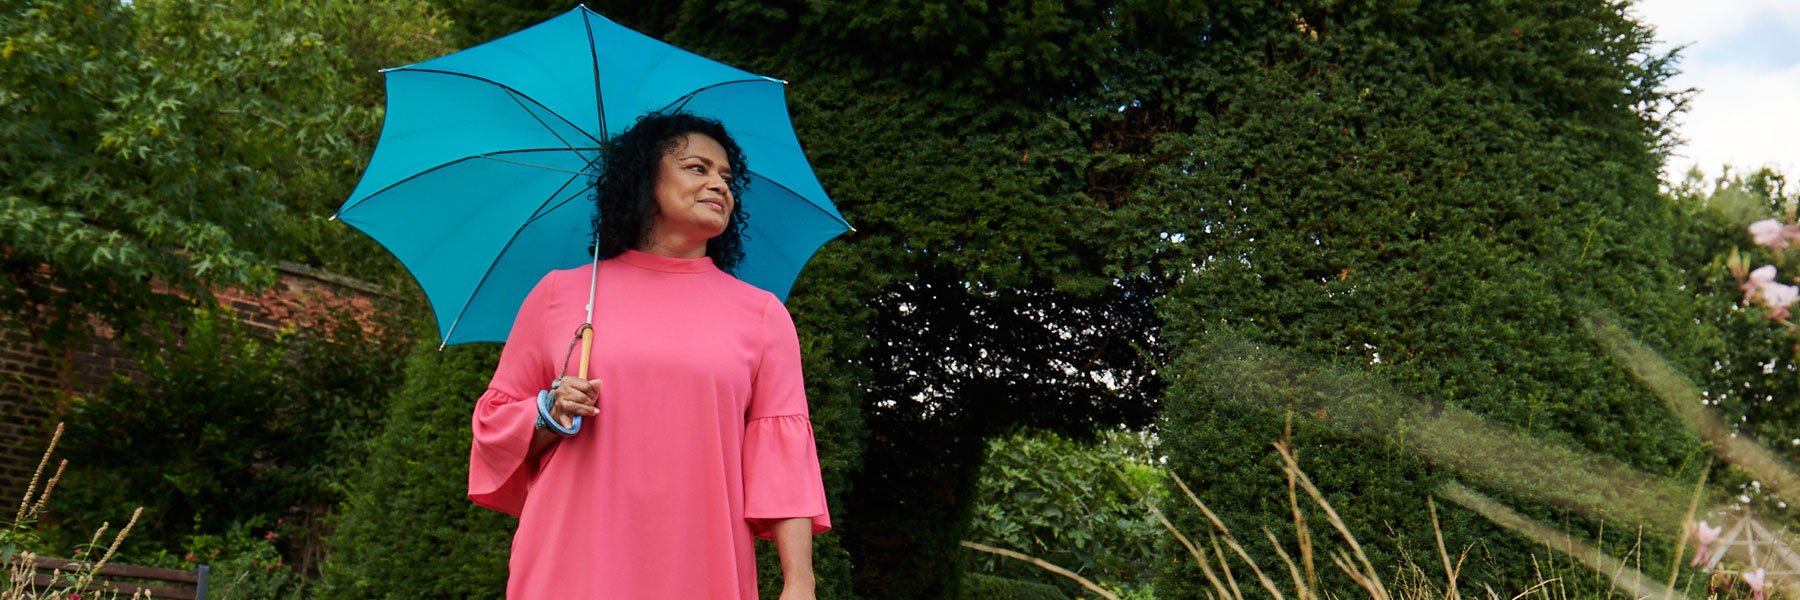 A smiling woman holding a pink umbrella